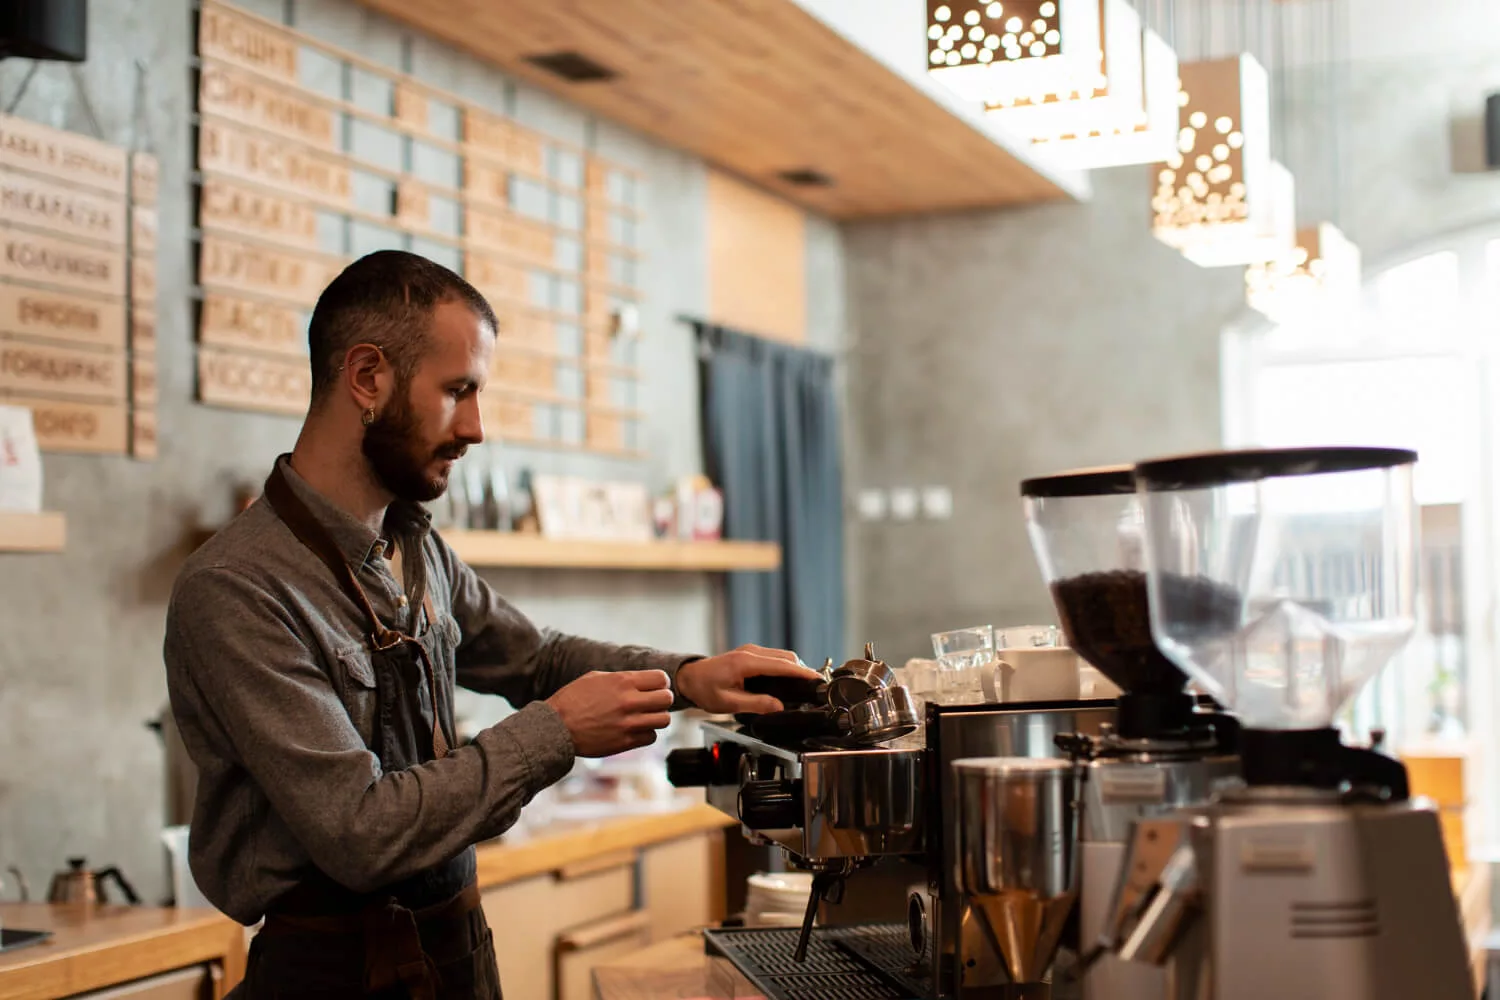 Cafés and communities: Why coffee lovers should support local coffee shops